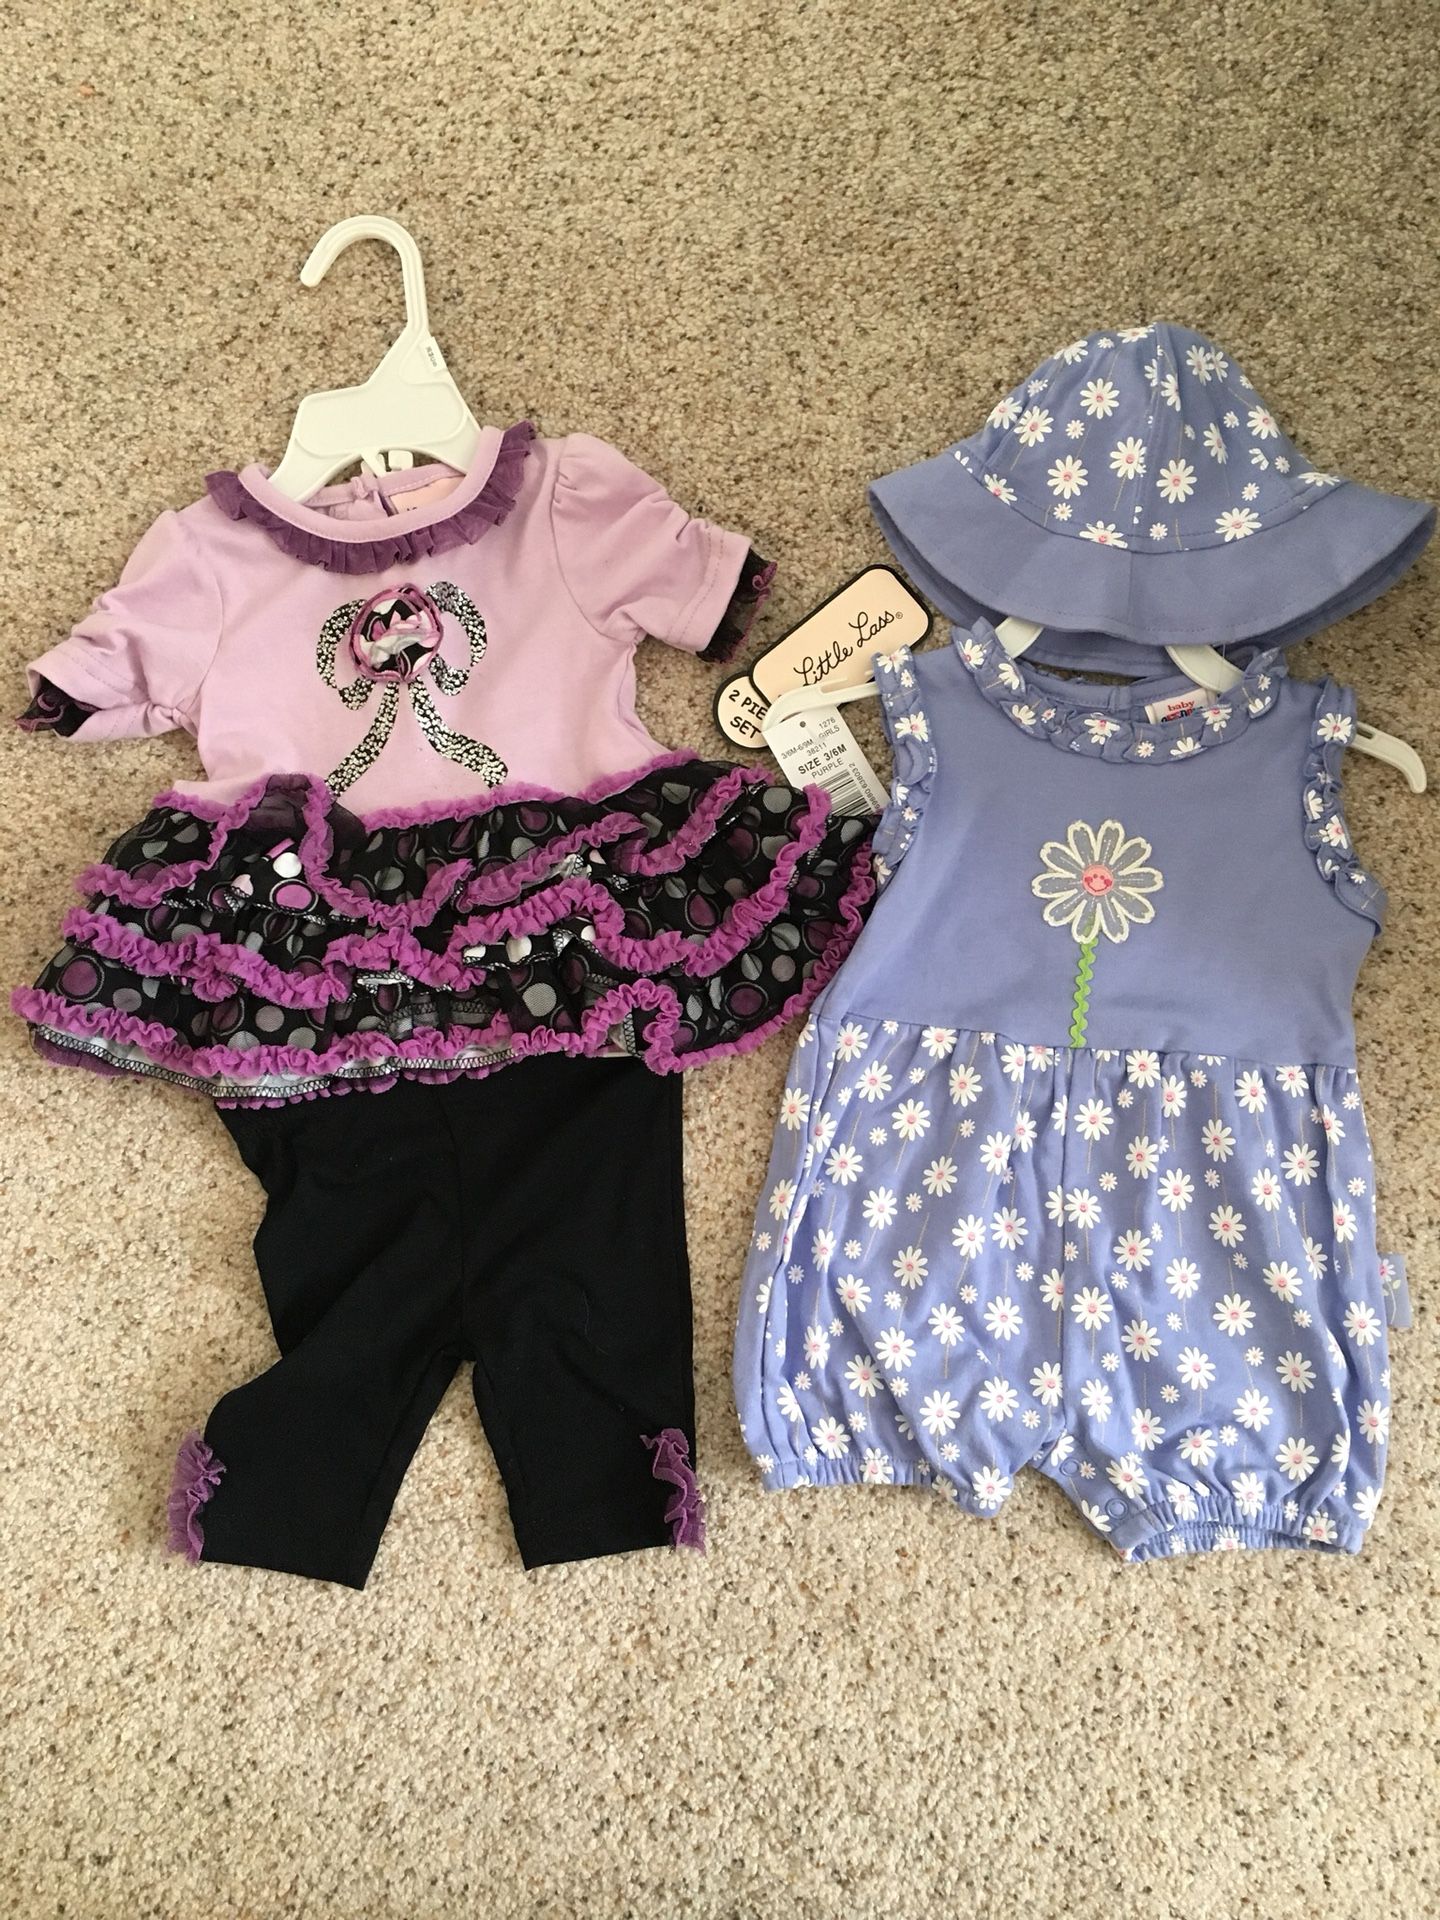 New 3-6 mon baby girl outfits